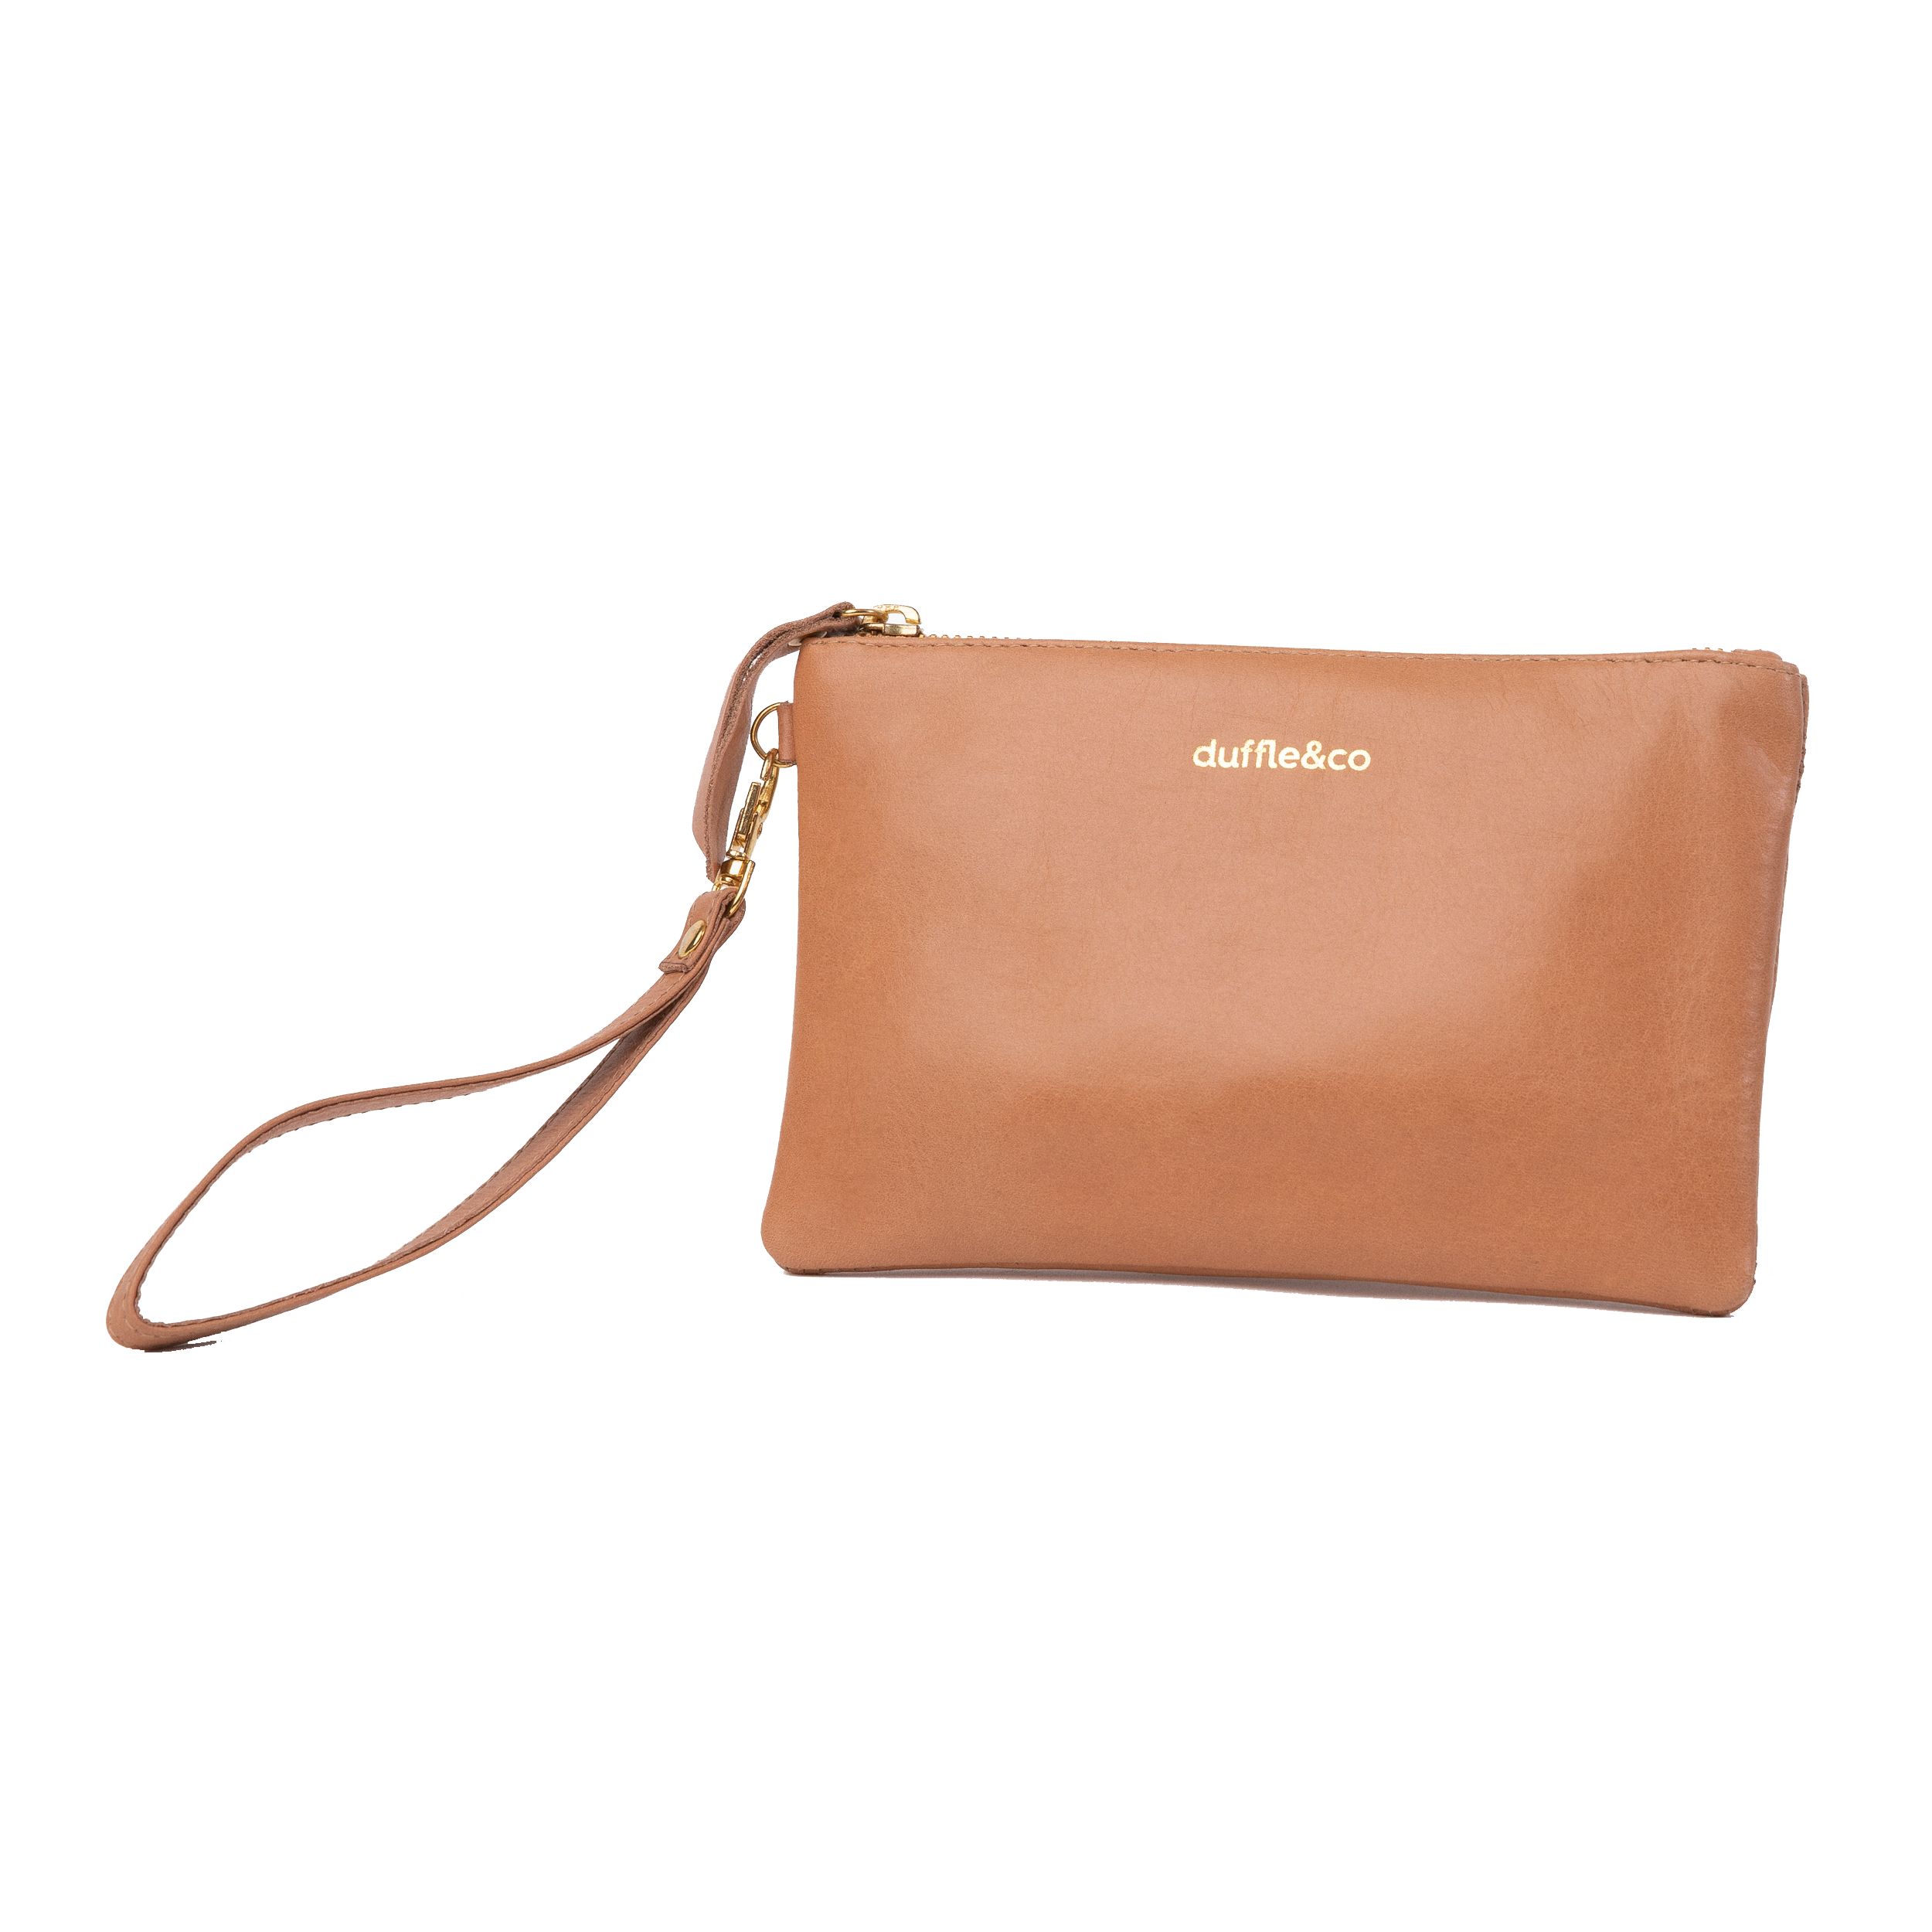 Duffle&Co: The Reese Pouch - Light Tan